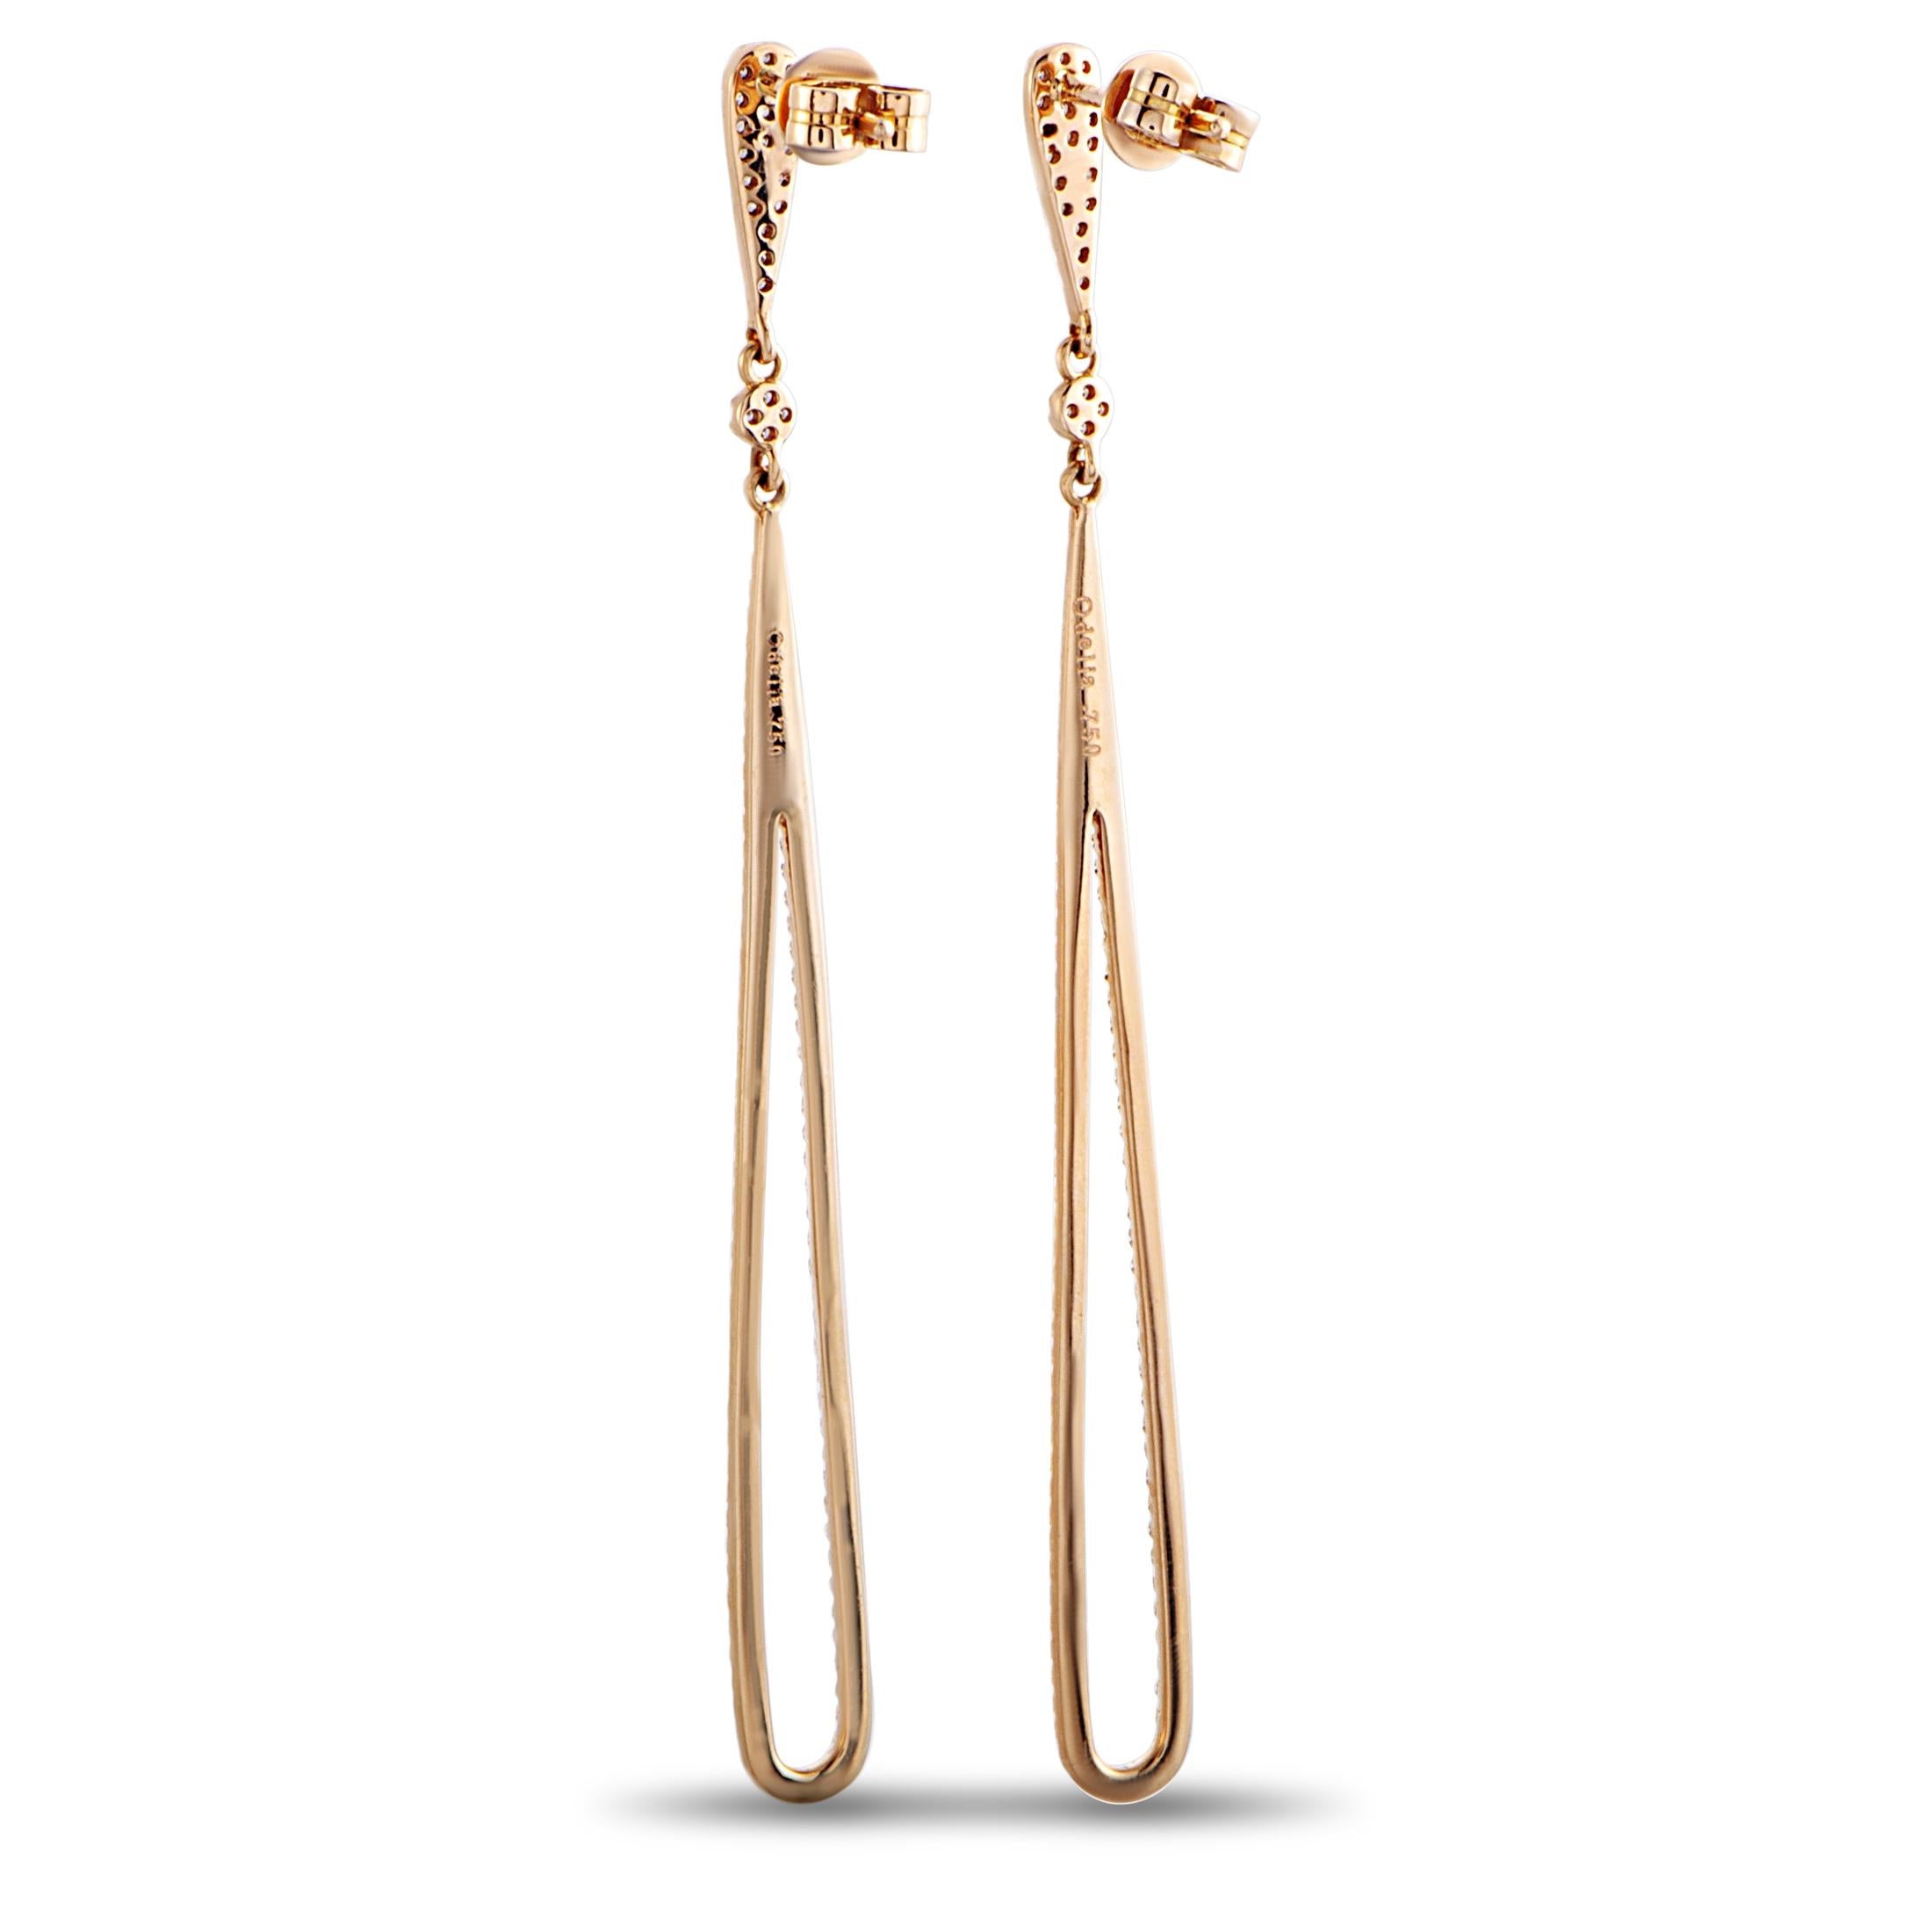 These LB Exclusive earrings are crafted from 18K rose gold and set with a total of 0.58 carats of diamonds. The earrings measure 2.75” in length and 0.25” in width and each of the two weighs 2.15 grams.
 
 Offered in brand new condition, this pair